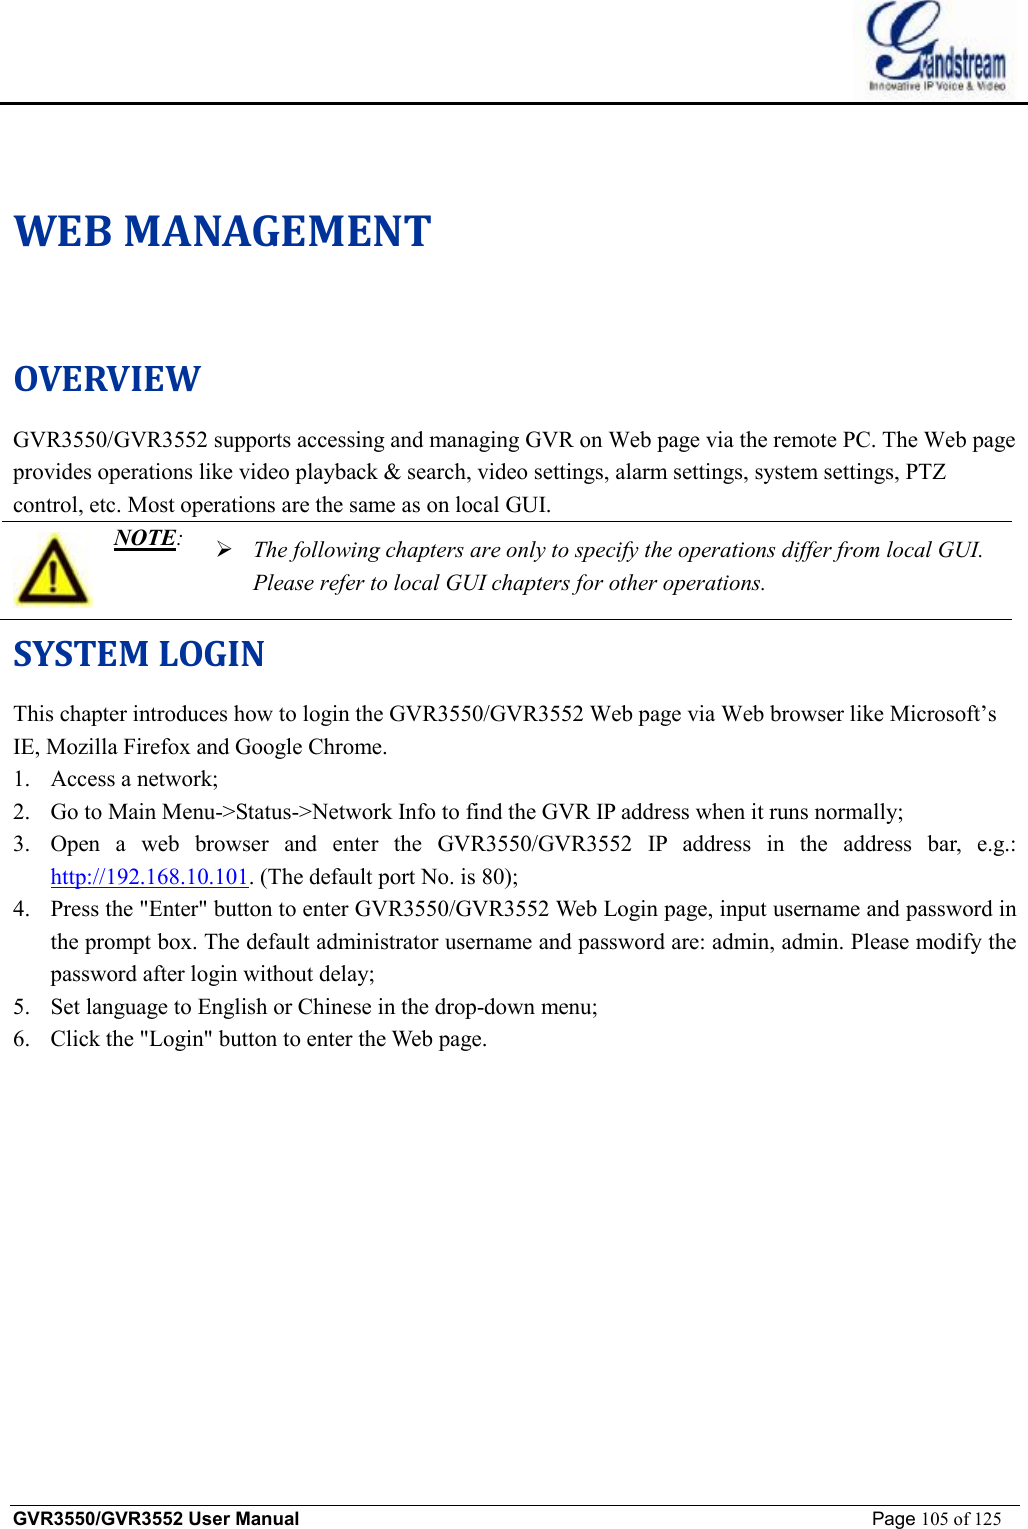    GVR3550/GVR3552 User Manual                                                             Page 105 of 125        WEB MANAGEMENT OVERVIEW GVR3550/GVR3552 supports accessing and managing GVR on Web page via the remote PC. The Web page provides operations like video playback &amp; search, video settings, alarm settings, system settings, PTZ control, etc. Most operations are the same as on local GUI.   NOTE: Ø The following chapters are only to specify the operations differ from local GUI. Please refer to local GUI chapters for other operations.  SYSTEM LOGIN This chapter introduces how to login the GVR3550/GVR3552 Web page via Web browser like Microsoft’s IE, Mozilla Firefox and Google Chrome. 1. Access a network; 2. Go to Main Menu-&gt;Status-&gt;Network Info to find the GVR IP address when it runs normally; 3. Open a web browser and enter the GVR3550/GVR3552 IP address in the address bar, e.g.: http://192.168.10.101. (The default port No. is 80); 4. Press the &quot;Enter&quot; button to enter GVR3550/GVR3552 Web Login page, input username and password in the prompt box. The default administrator username and password are: admin, admin. Please modify the password after login without delay; 5. Set language to English or Chinese in the drop-down menu; 6. Click the &quot;Login&quot; button to enter the Web page. 